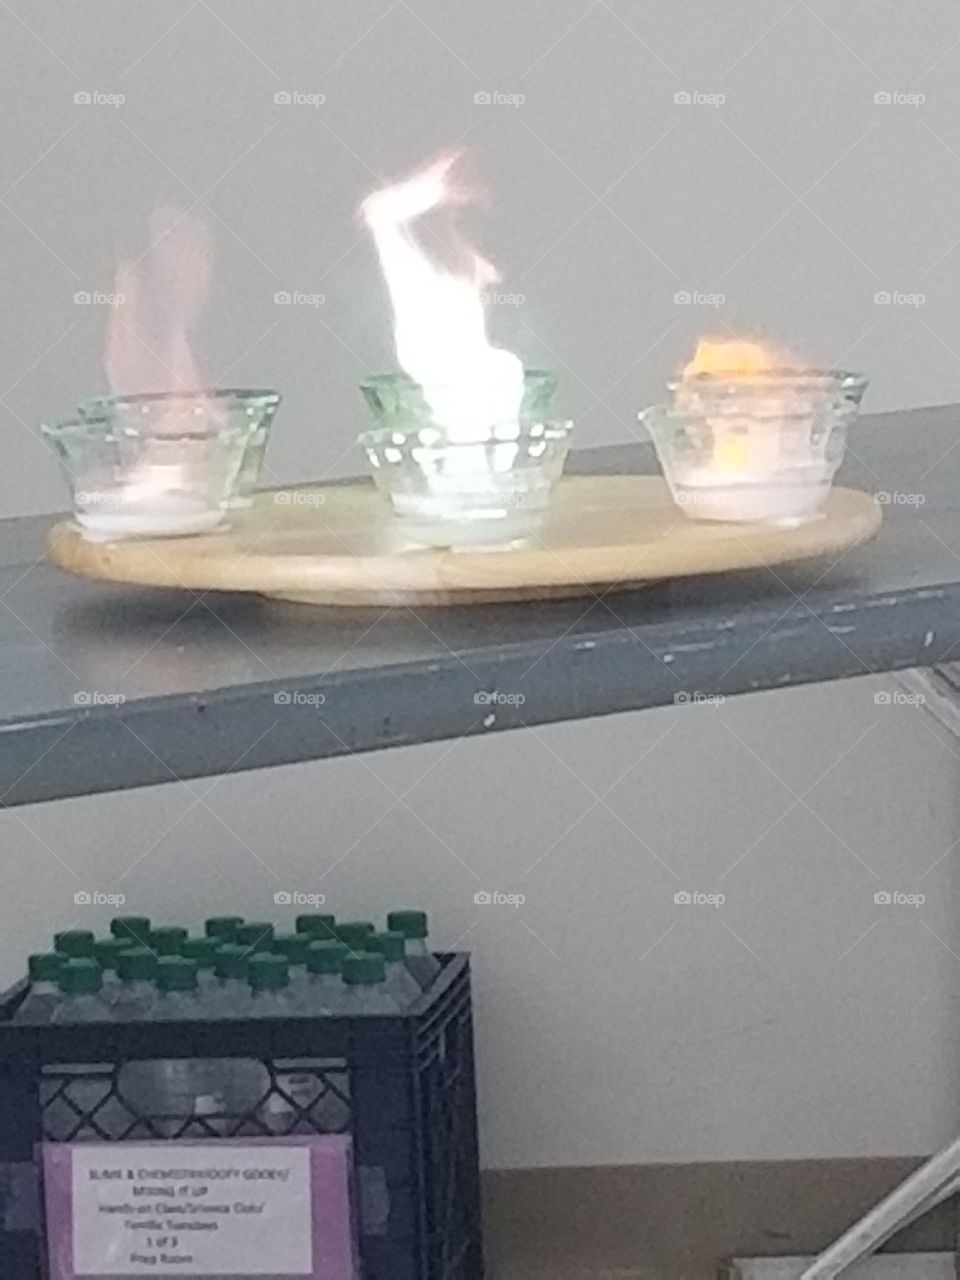 science experiment at a museum